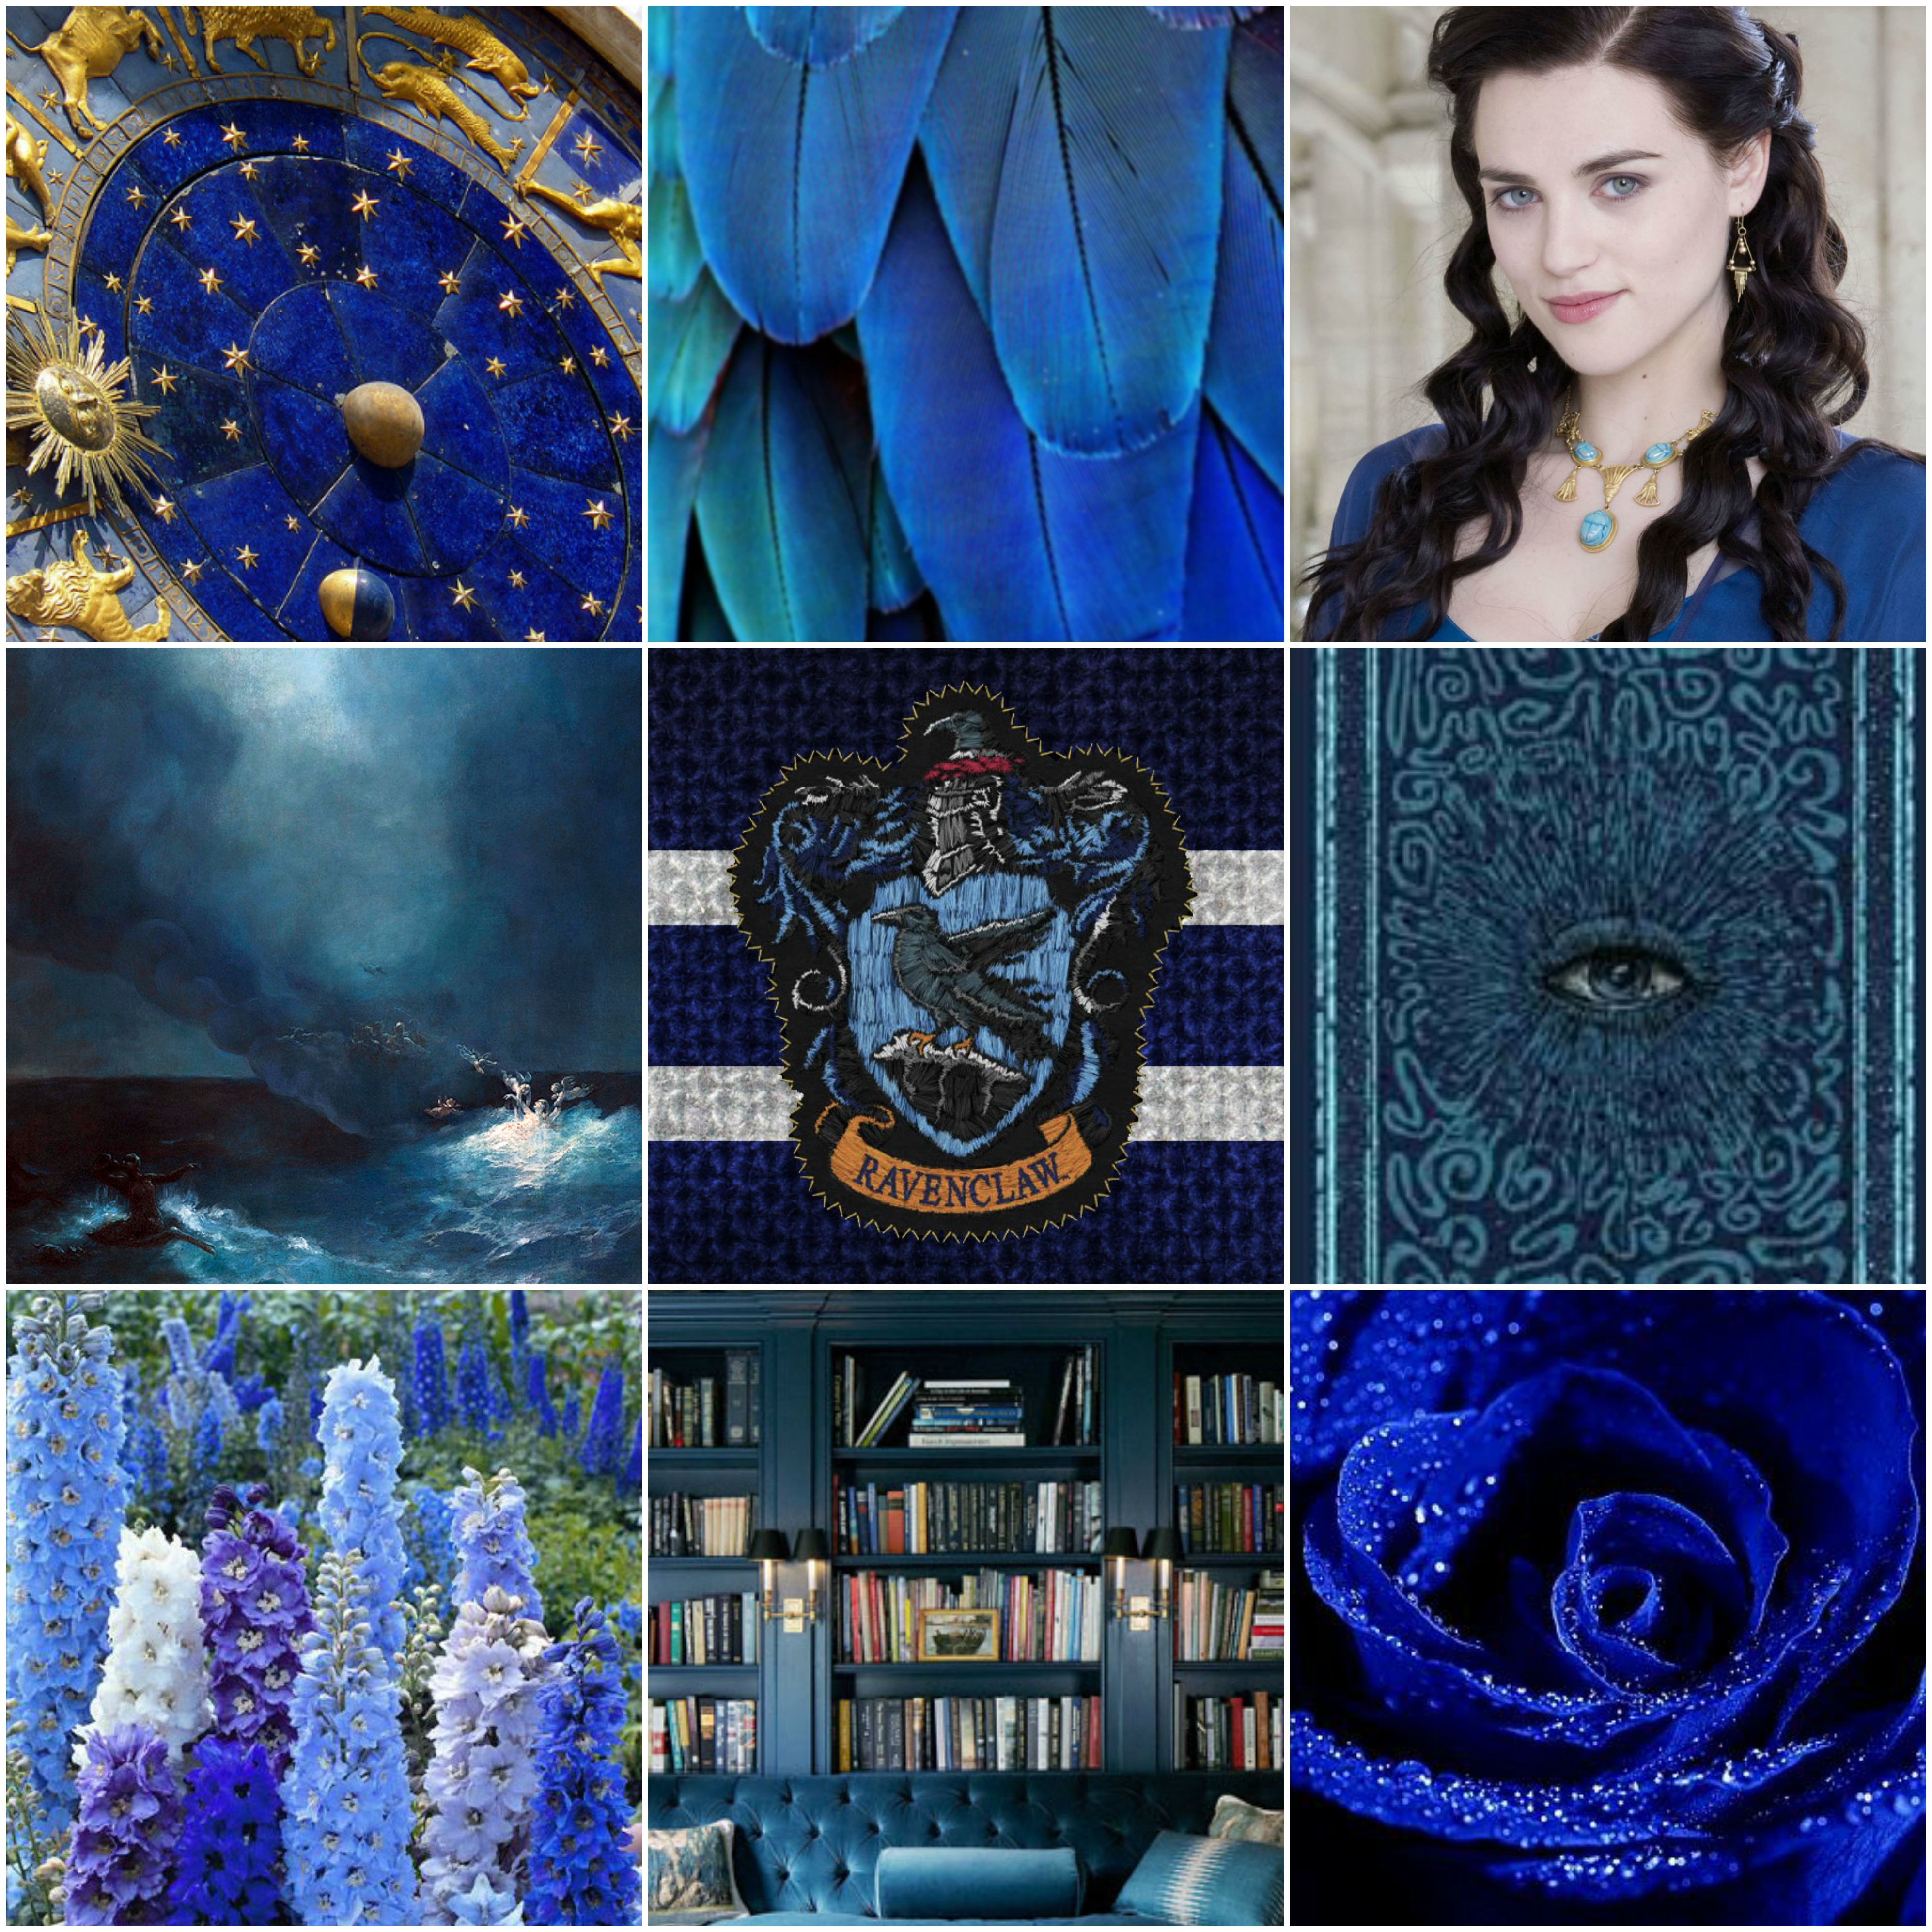 You're a Ravenclaw” Spotify playlist in bio, What house should I